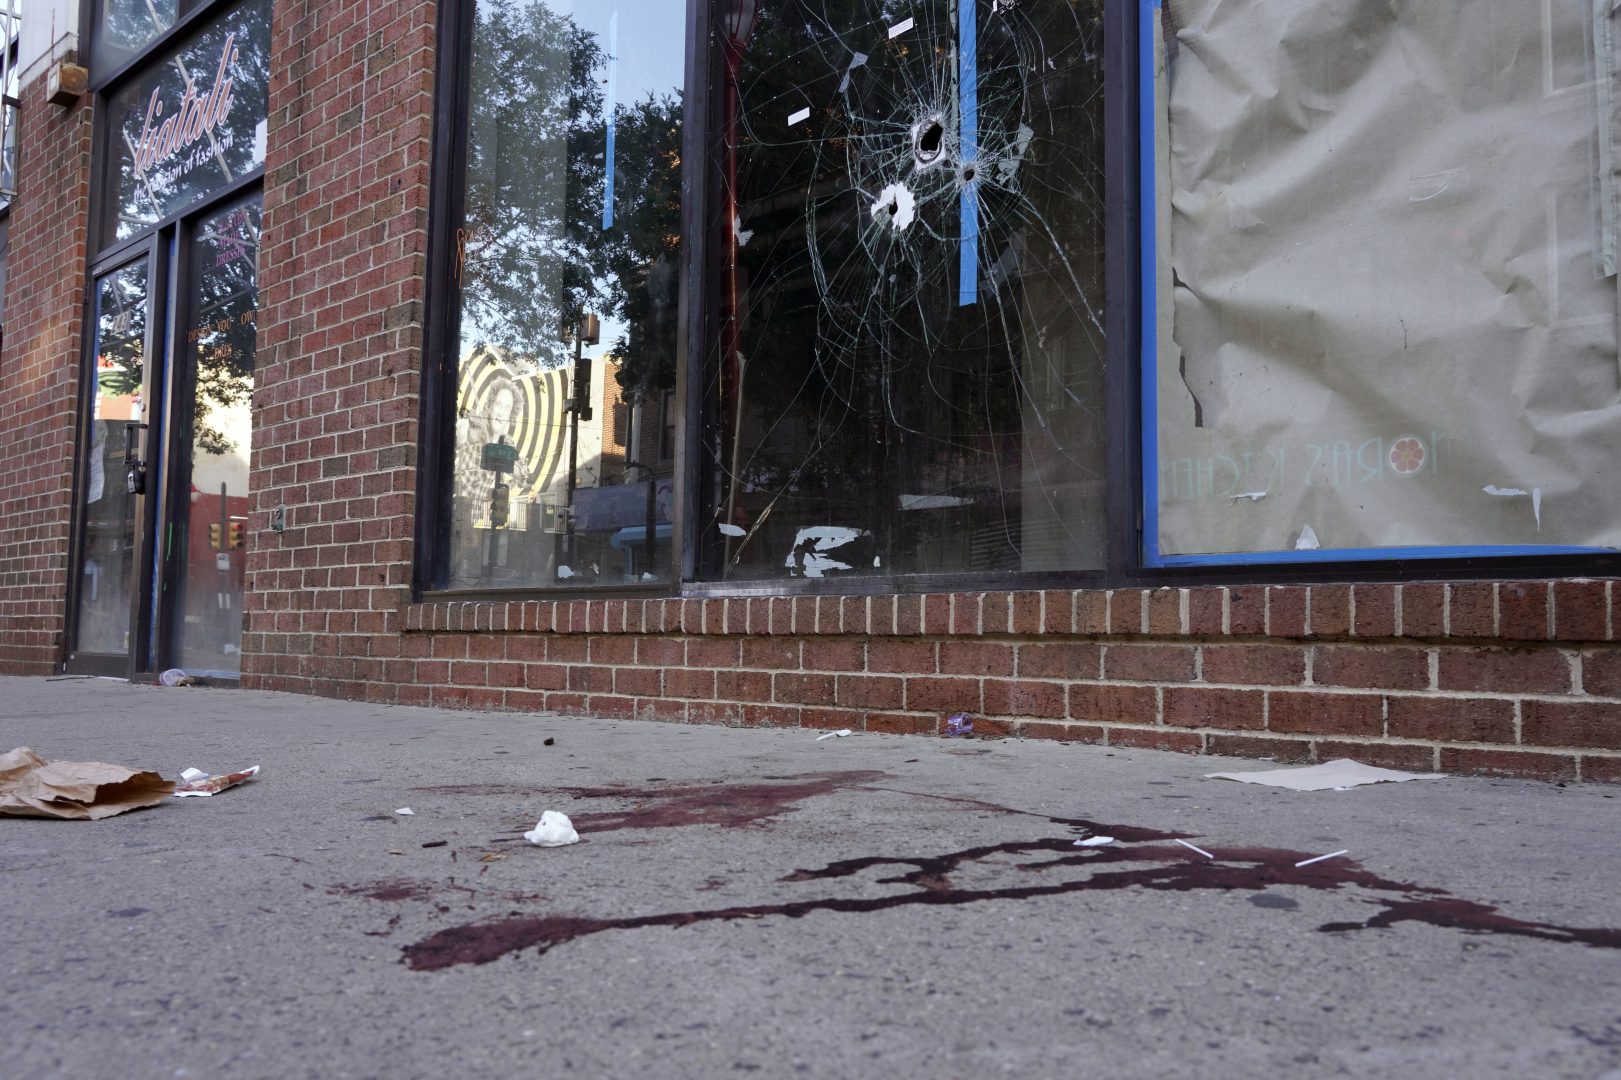  Blood is seen at the scene of a fatal overnight shooting on South Street in Philadelphia, Sunday, June 5, 2022, where bullet holes on a storefront window from a prior shooting can also be seen. 